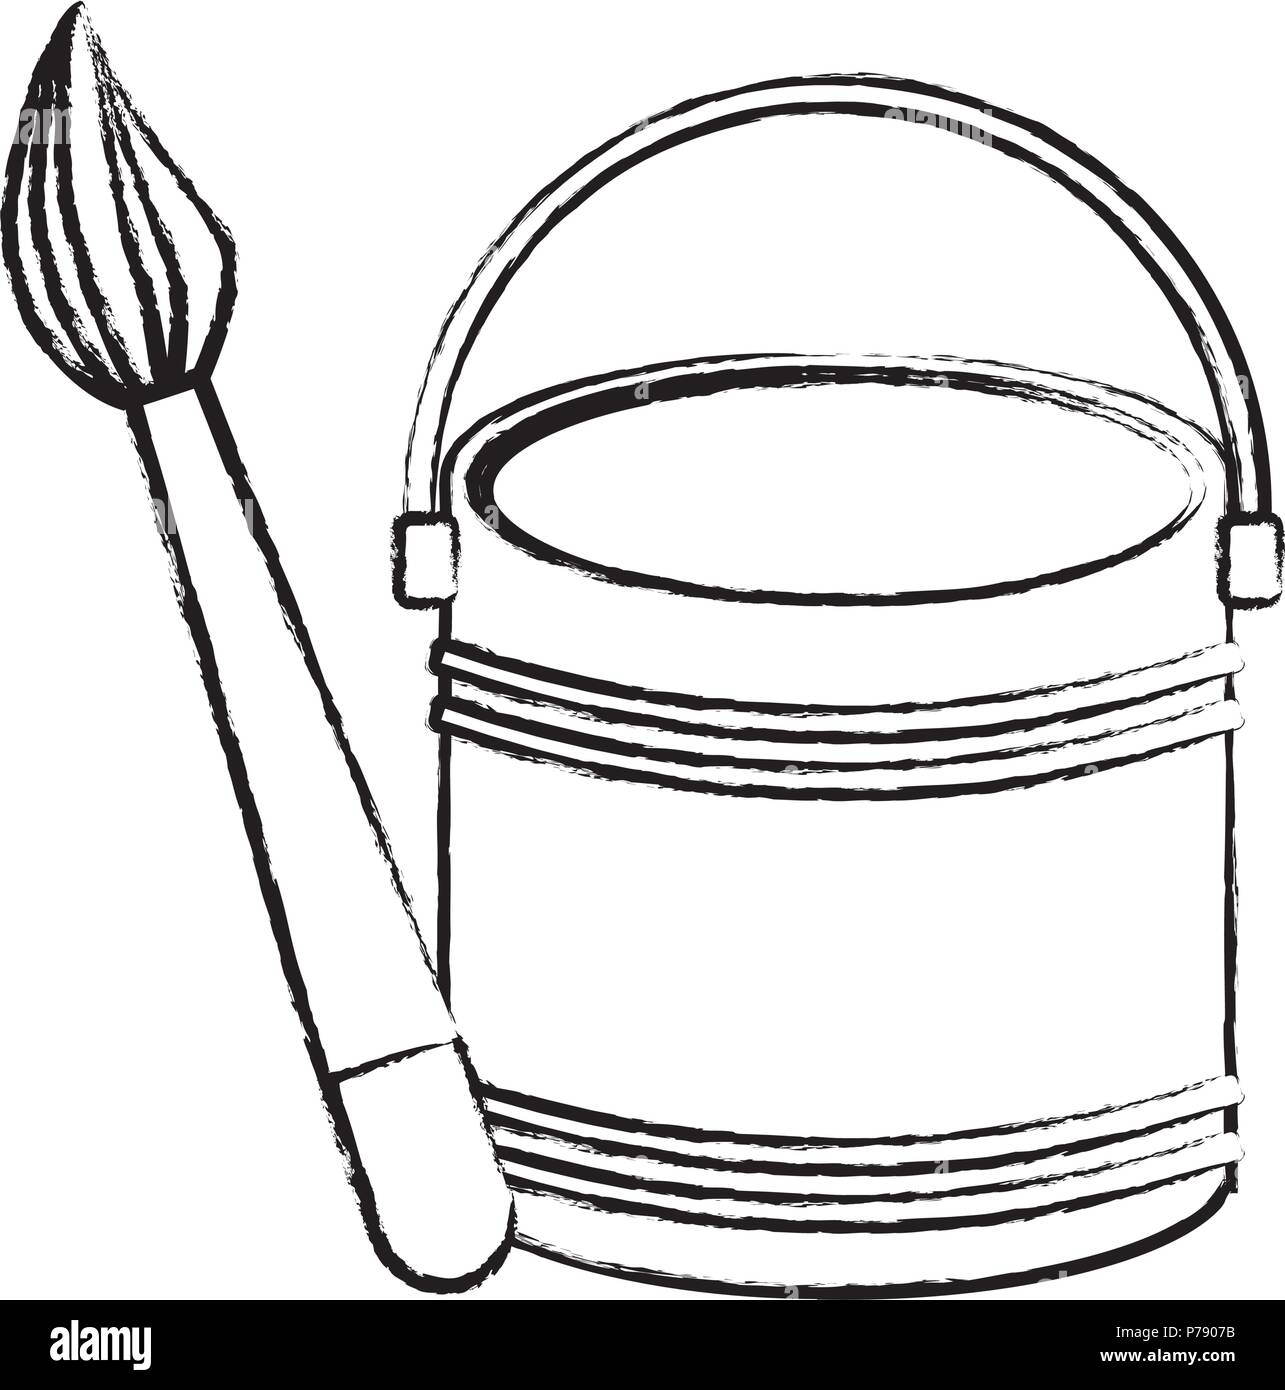 paint bucket and brush icon over white background, vector ...